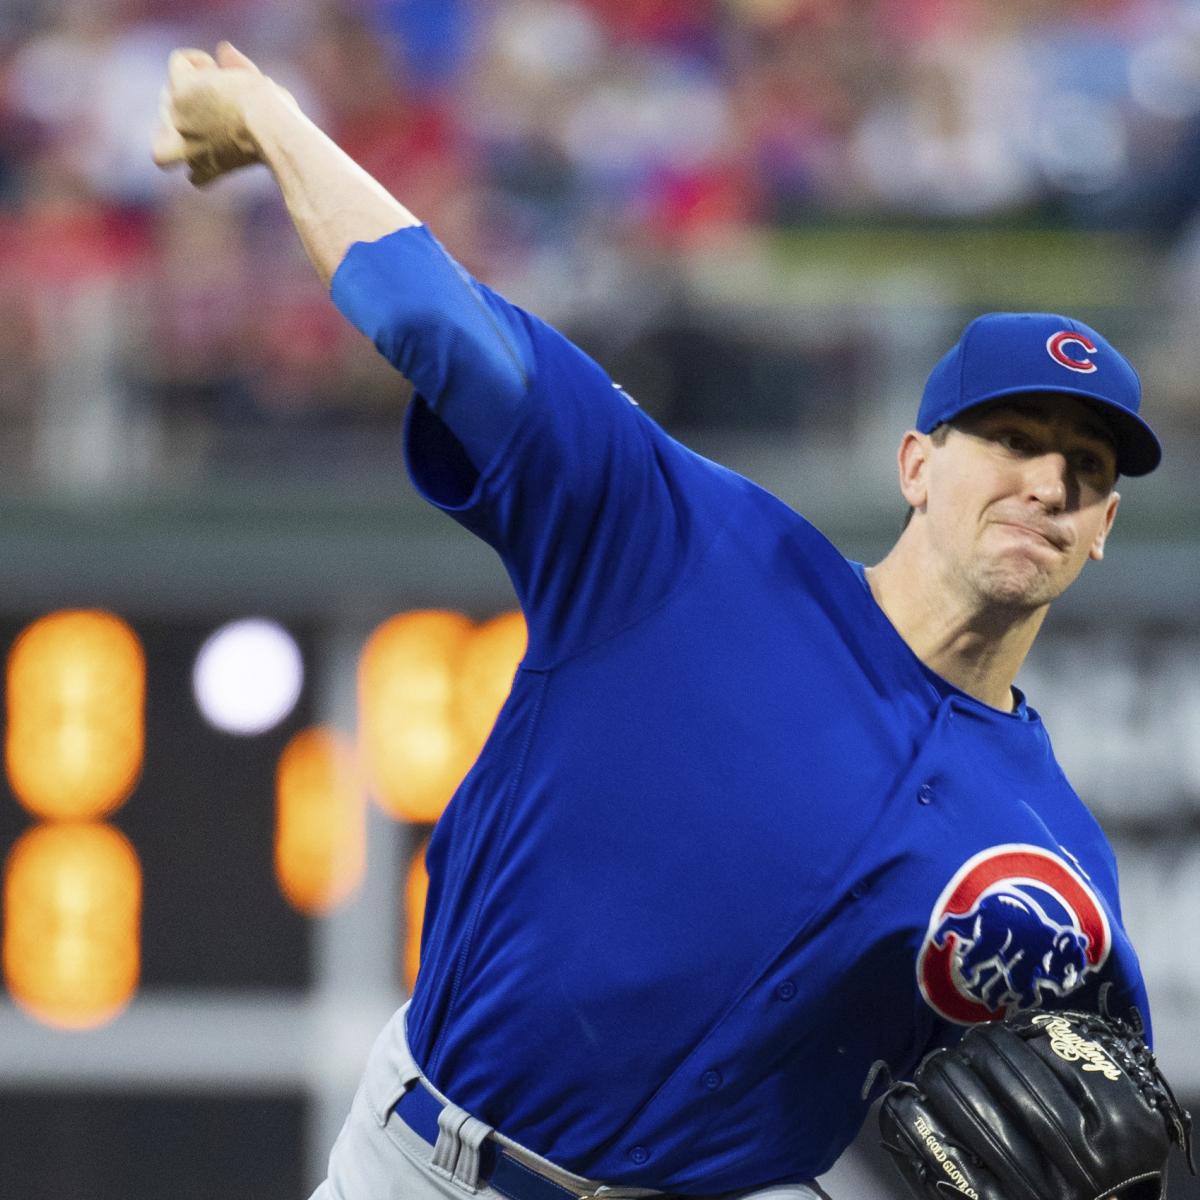 Kyle Hendricks Bounces Back, Forces Cubs' Hand On 2024 Contract